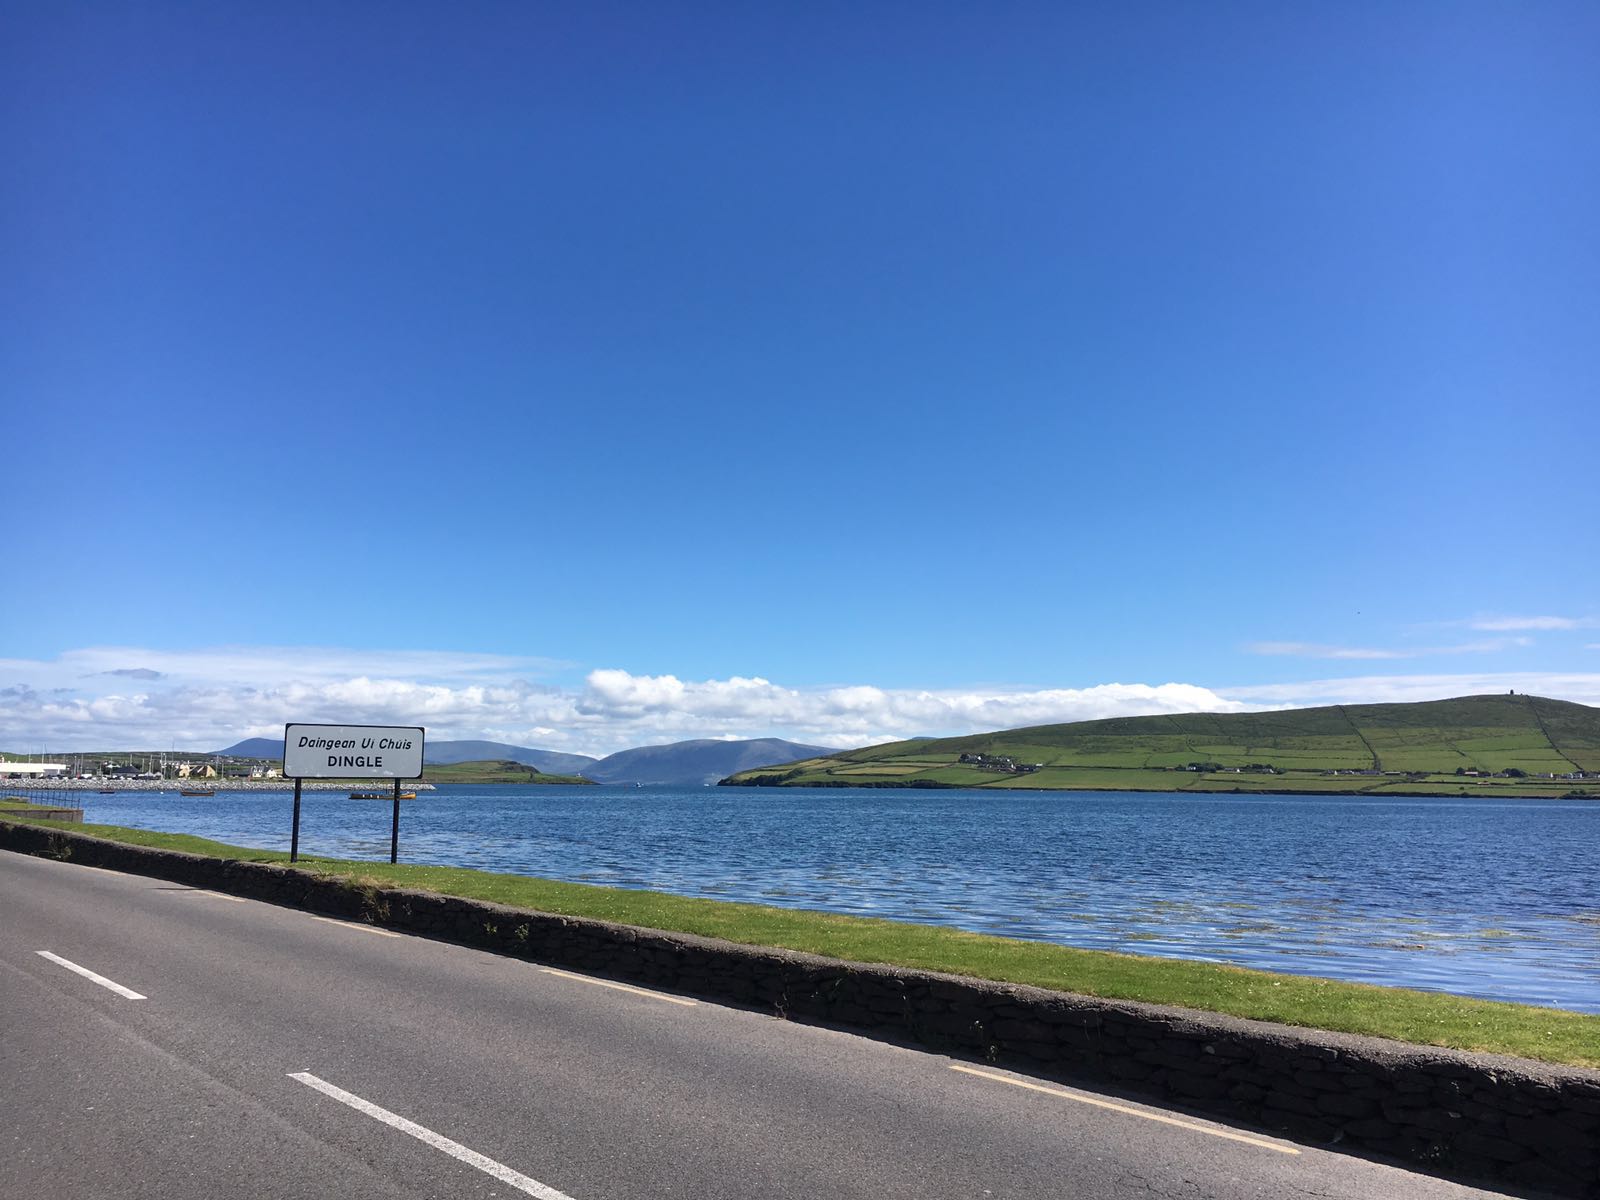 Returning to Dingle from the West